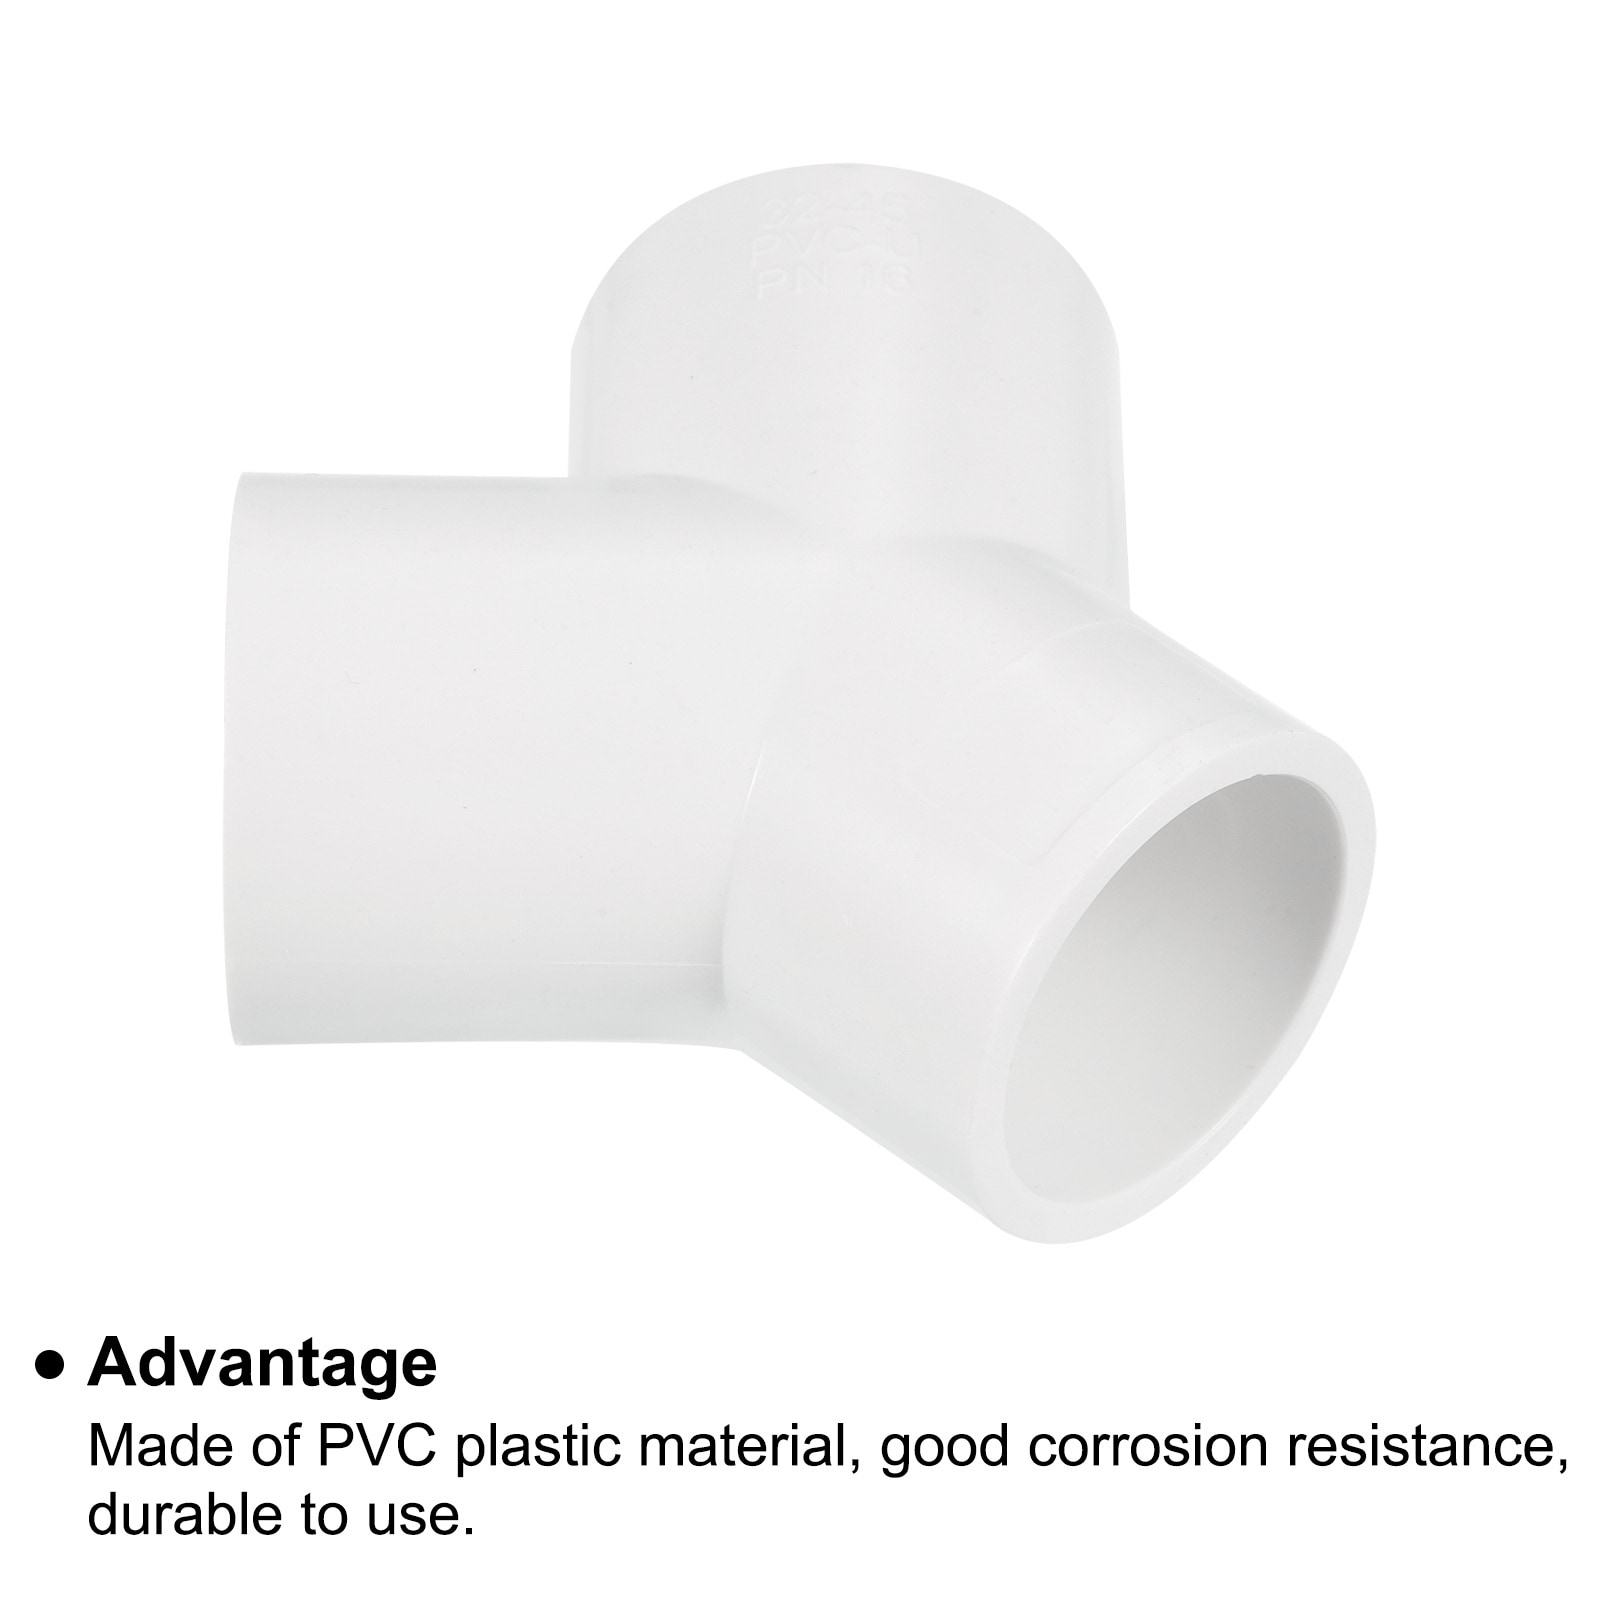 How Are PVC Pipe Fittings Made?, PVC Pipe & Fittings